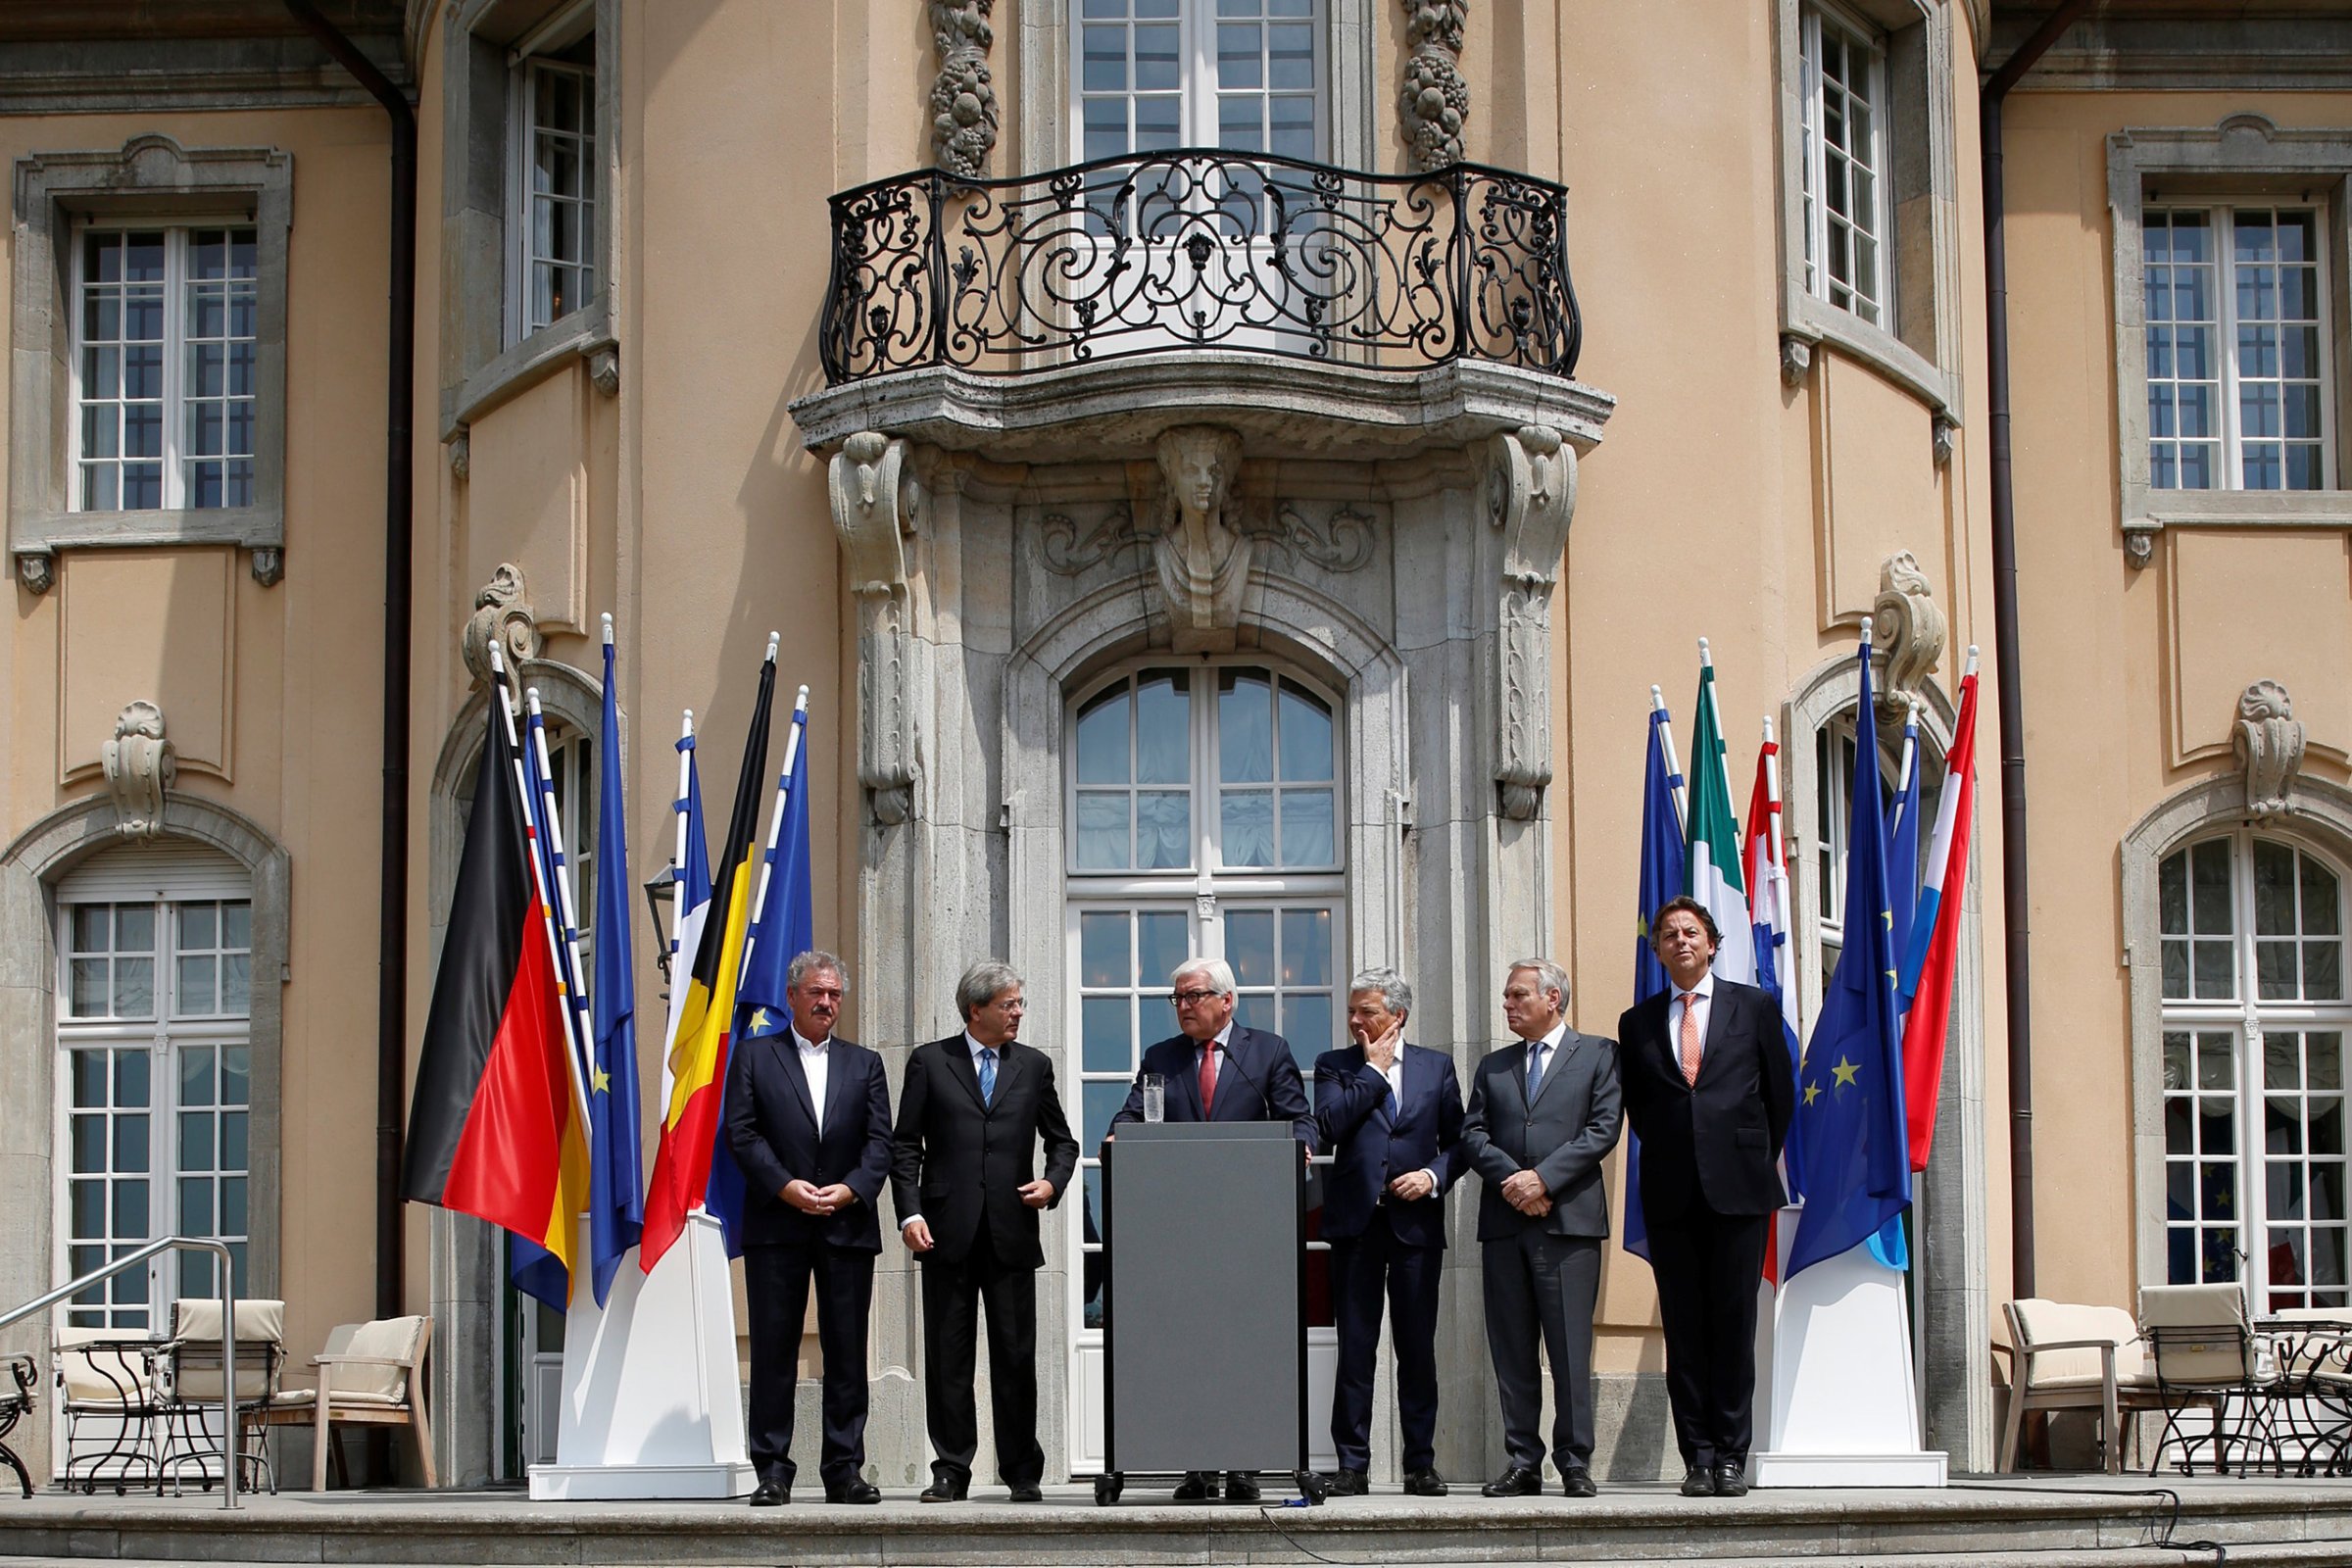 Luxembourg's Foreign Minister Jean Asselborn, Italian Foreign Minister Paolo Gentiloni, German Foreign Minister Frank-Walter Steinmeier, Belgian Foreign Minister Didier Reynders, French Foreign Minister Jean-Marc Ayrault and Dutch Foreign Minister Bert Koenders (L-R) attend a press conference after a foreign minister meeting of the EU founding members in Berlin on June 25, 2016.